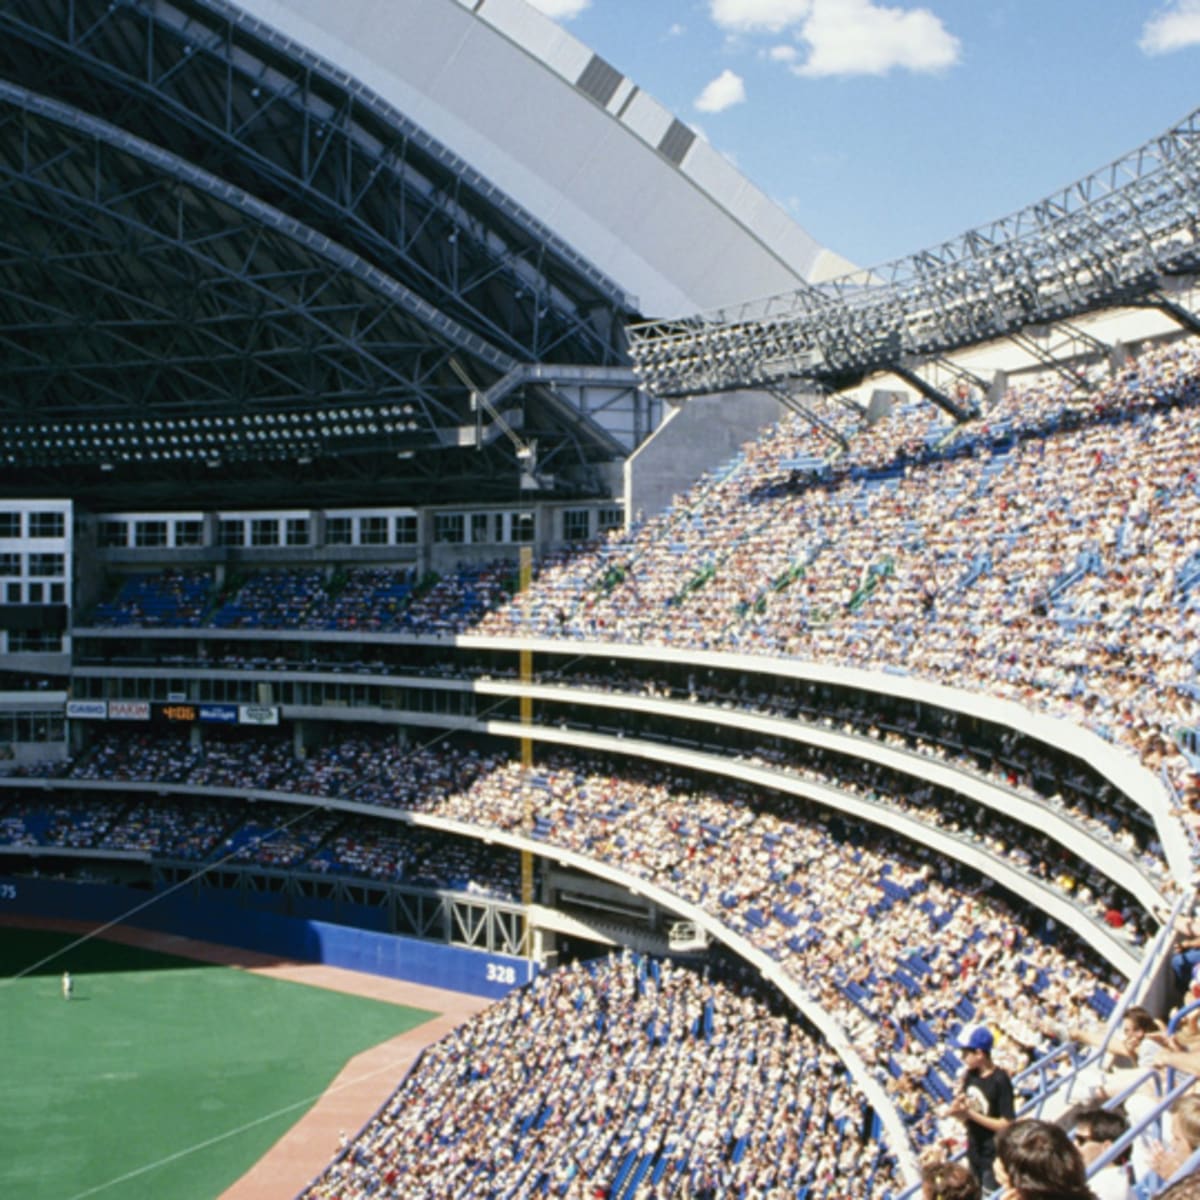 Ballpark Quirks Toronto S Rogers Centre Changed The Game With Retractable Roof Sports Illustrated